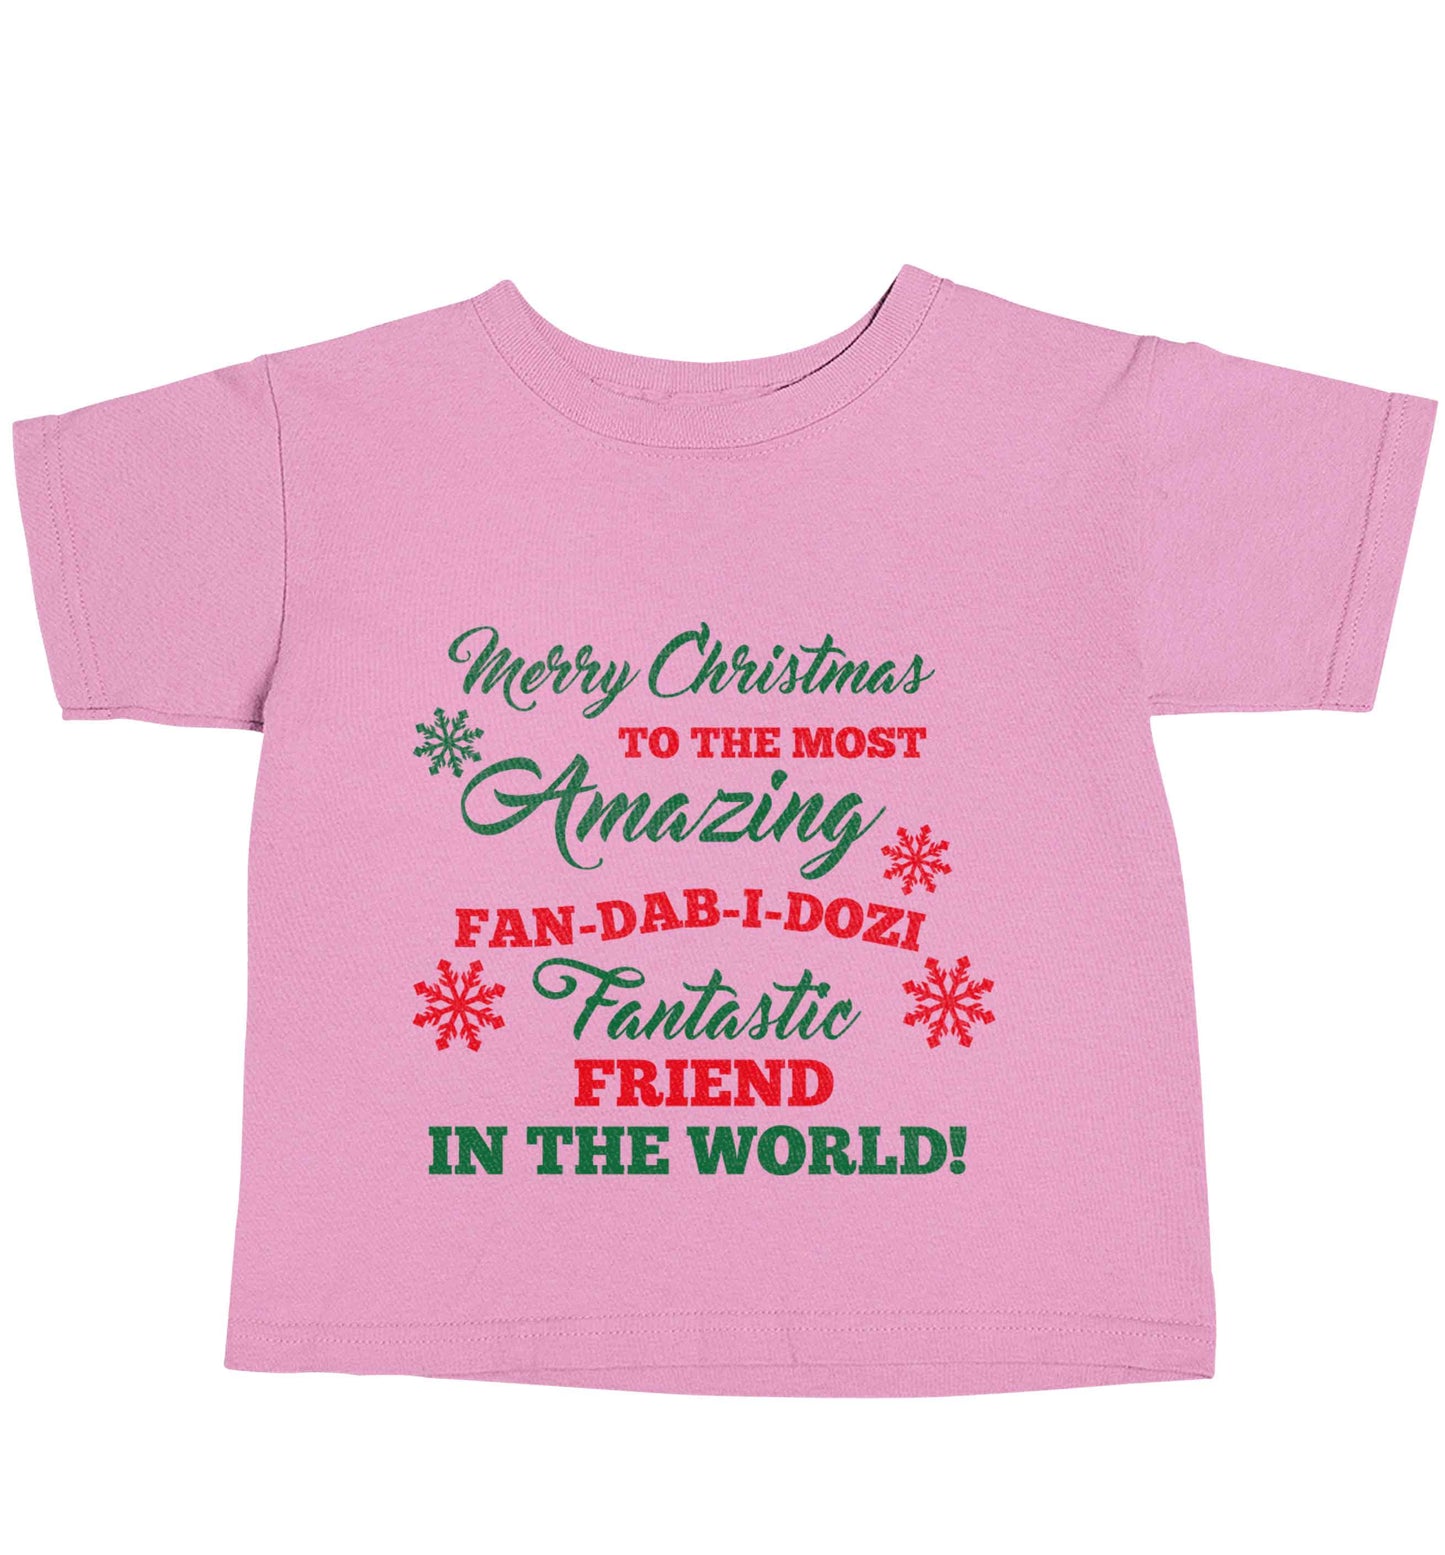 Merry Christmas to the most amazing fan-dab-i-dozi fantasic friend in the world light pink baby toddler Tshirt 2 Years